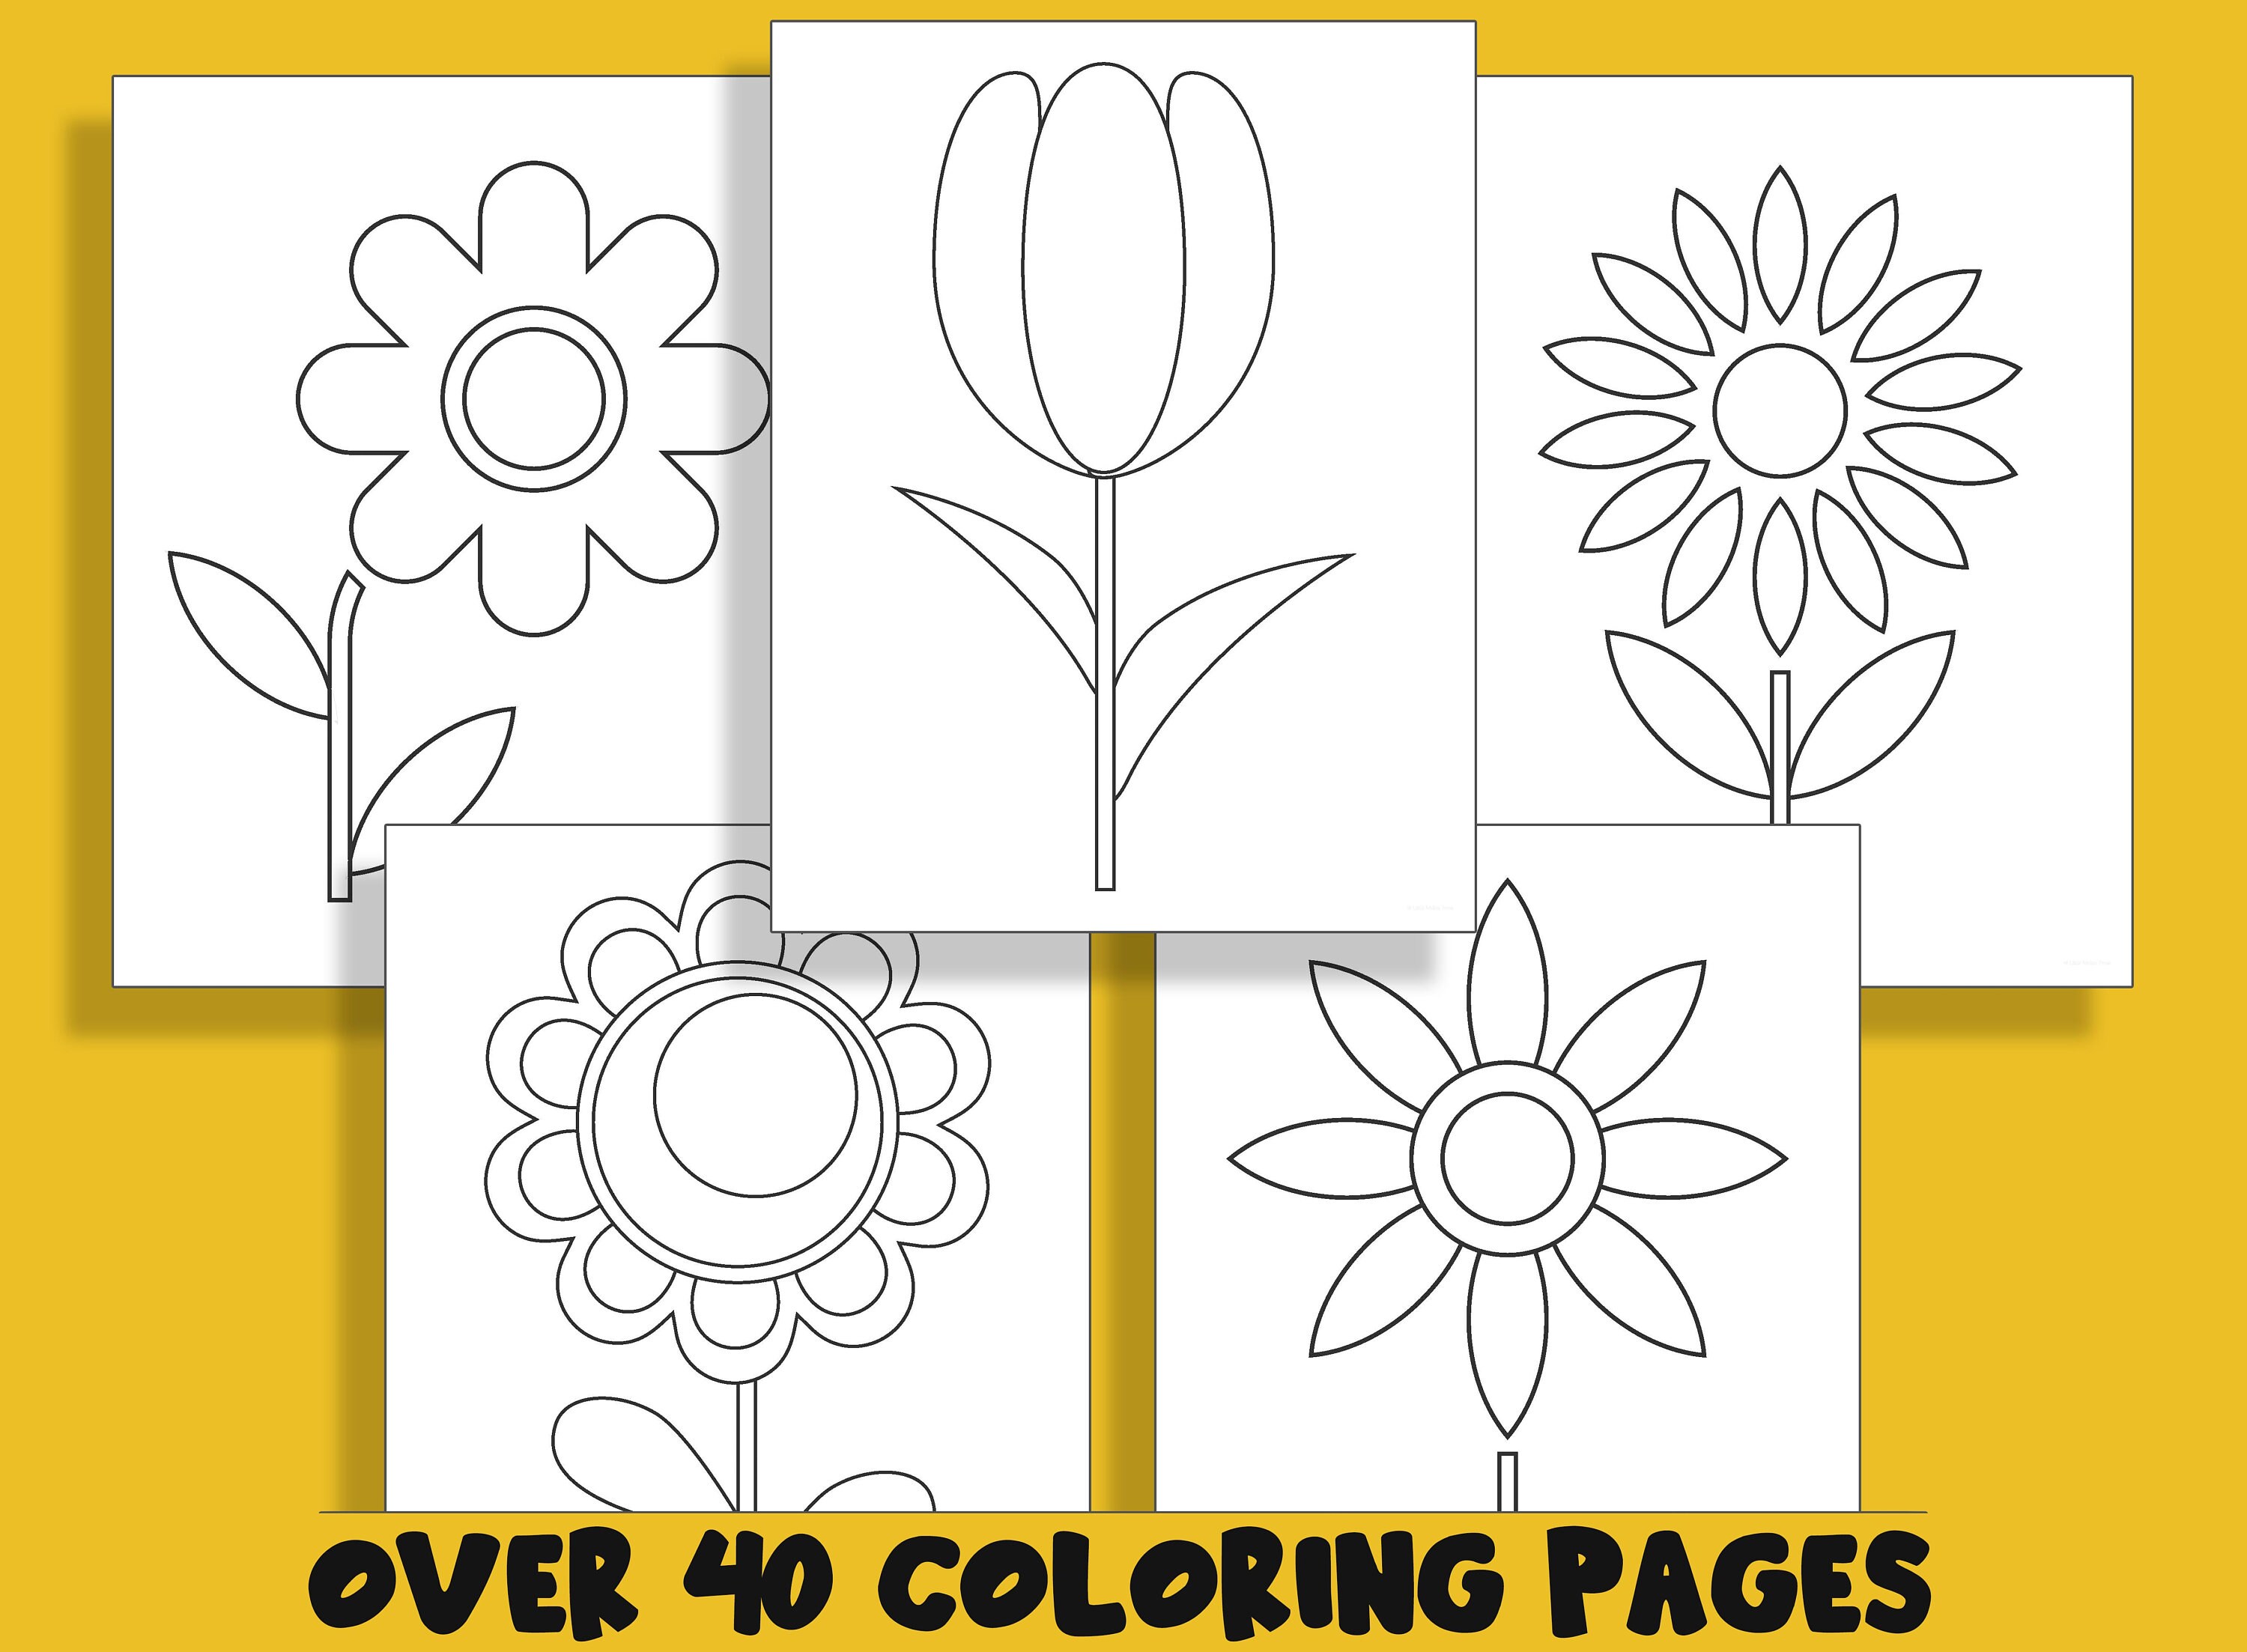 Spring flowers coloring book printable coloring pages for kids a fun way for kids of all ages to develop creativity focus motor skills